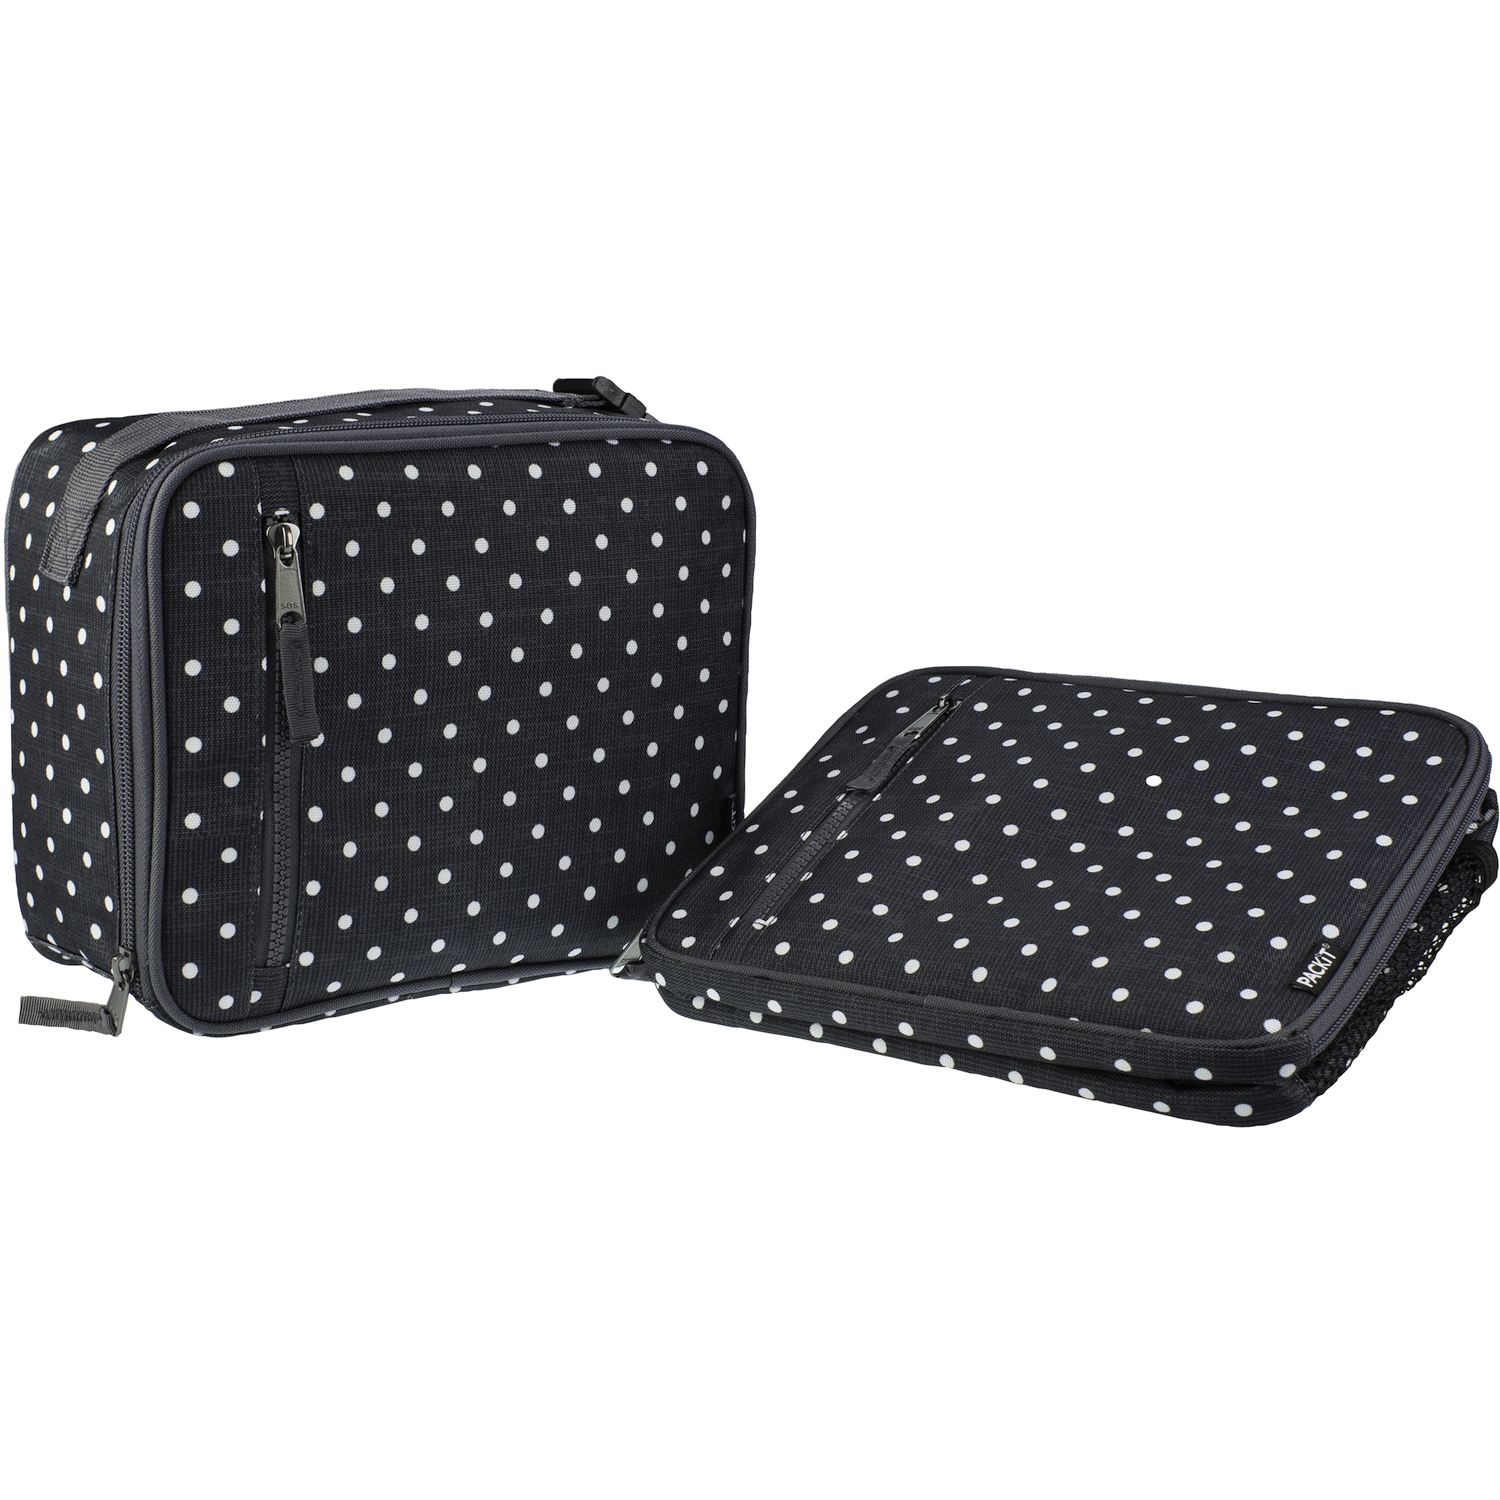     Classic Lunch Box Polka Dots, 4.5  (PACKiT PACKIT0037)